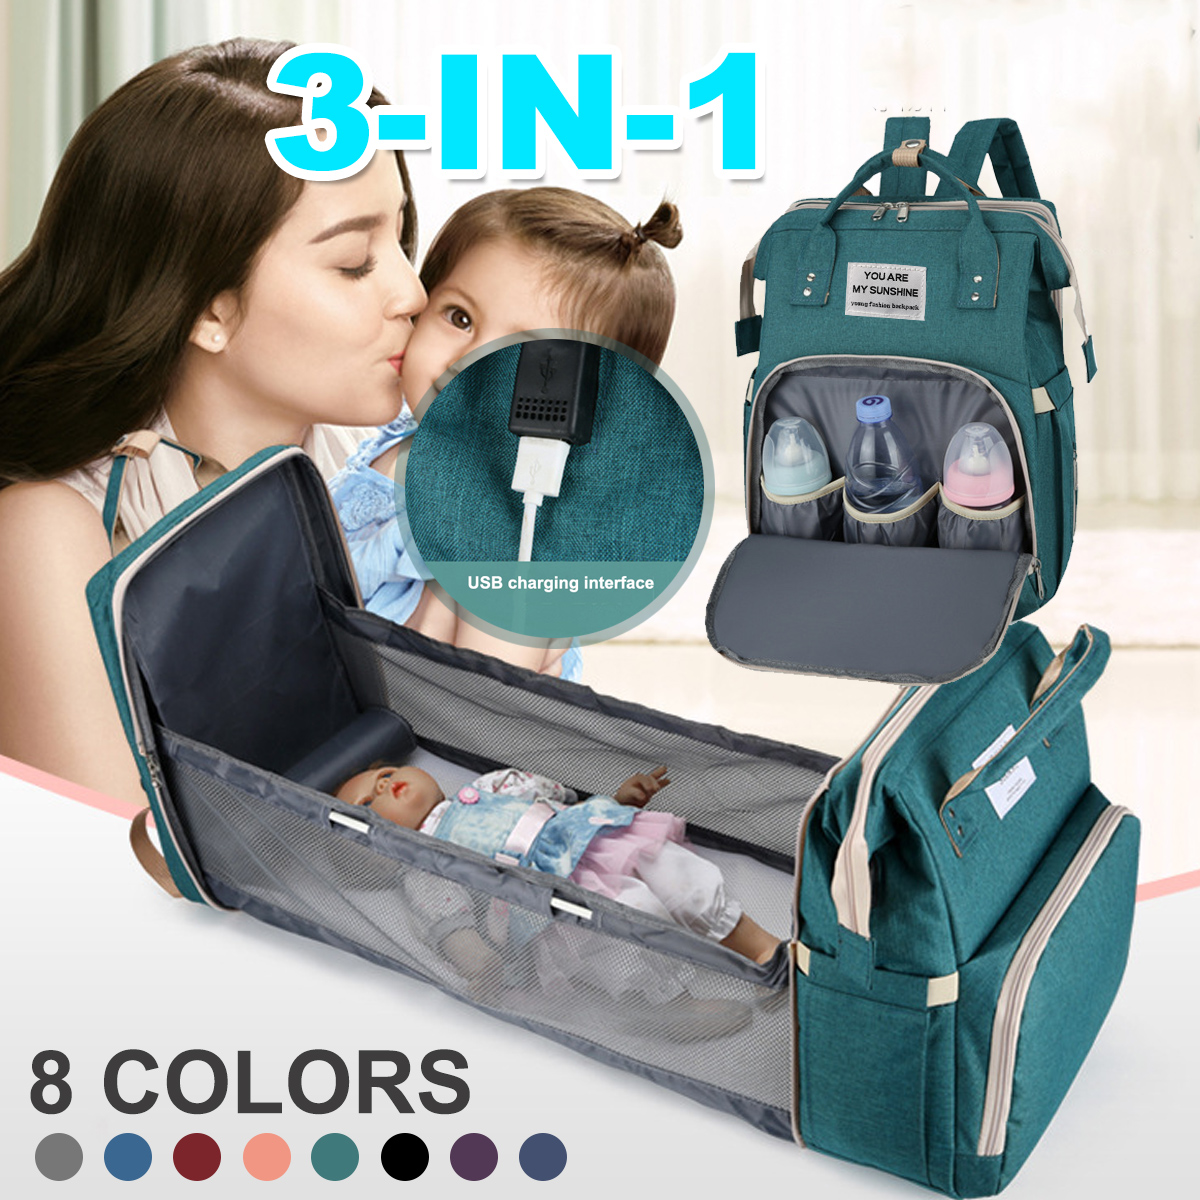 3-IN-1-Diaper-Bag--Baby-Crib-Backpack-Foldable-Nappy-Mommy-Bags-For-Mom-Dad-With-External-USB-Interf-1826523-1